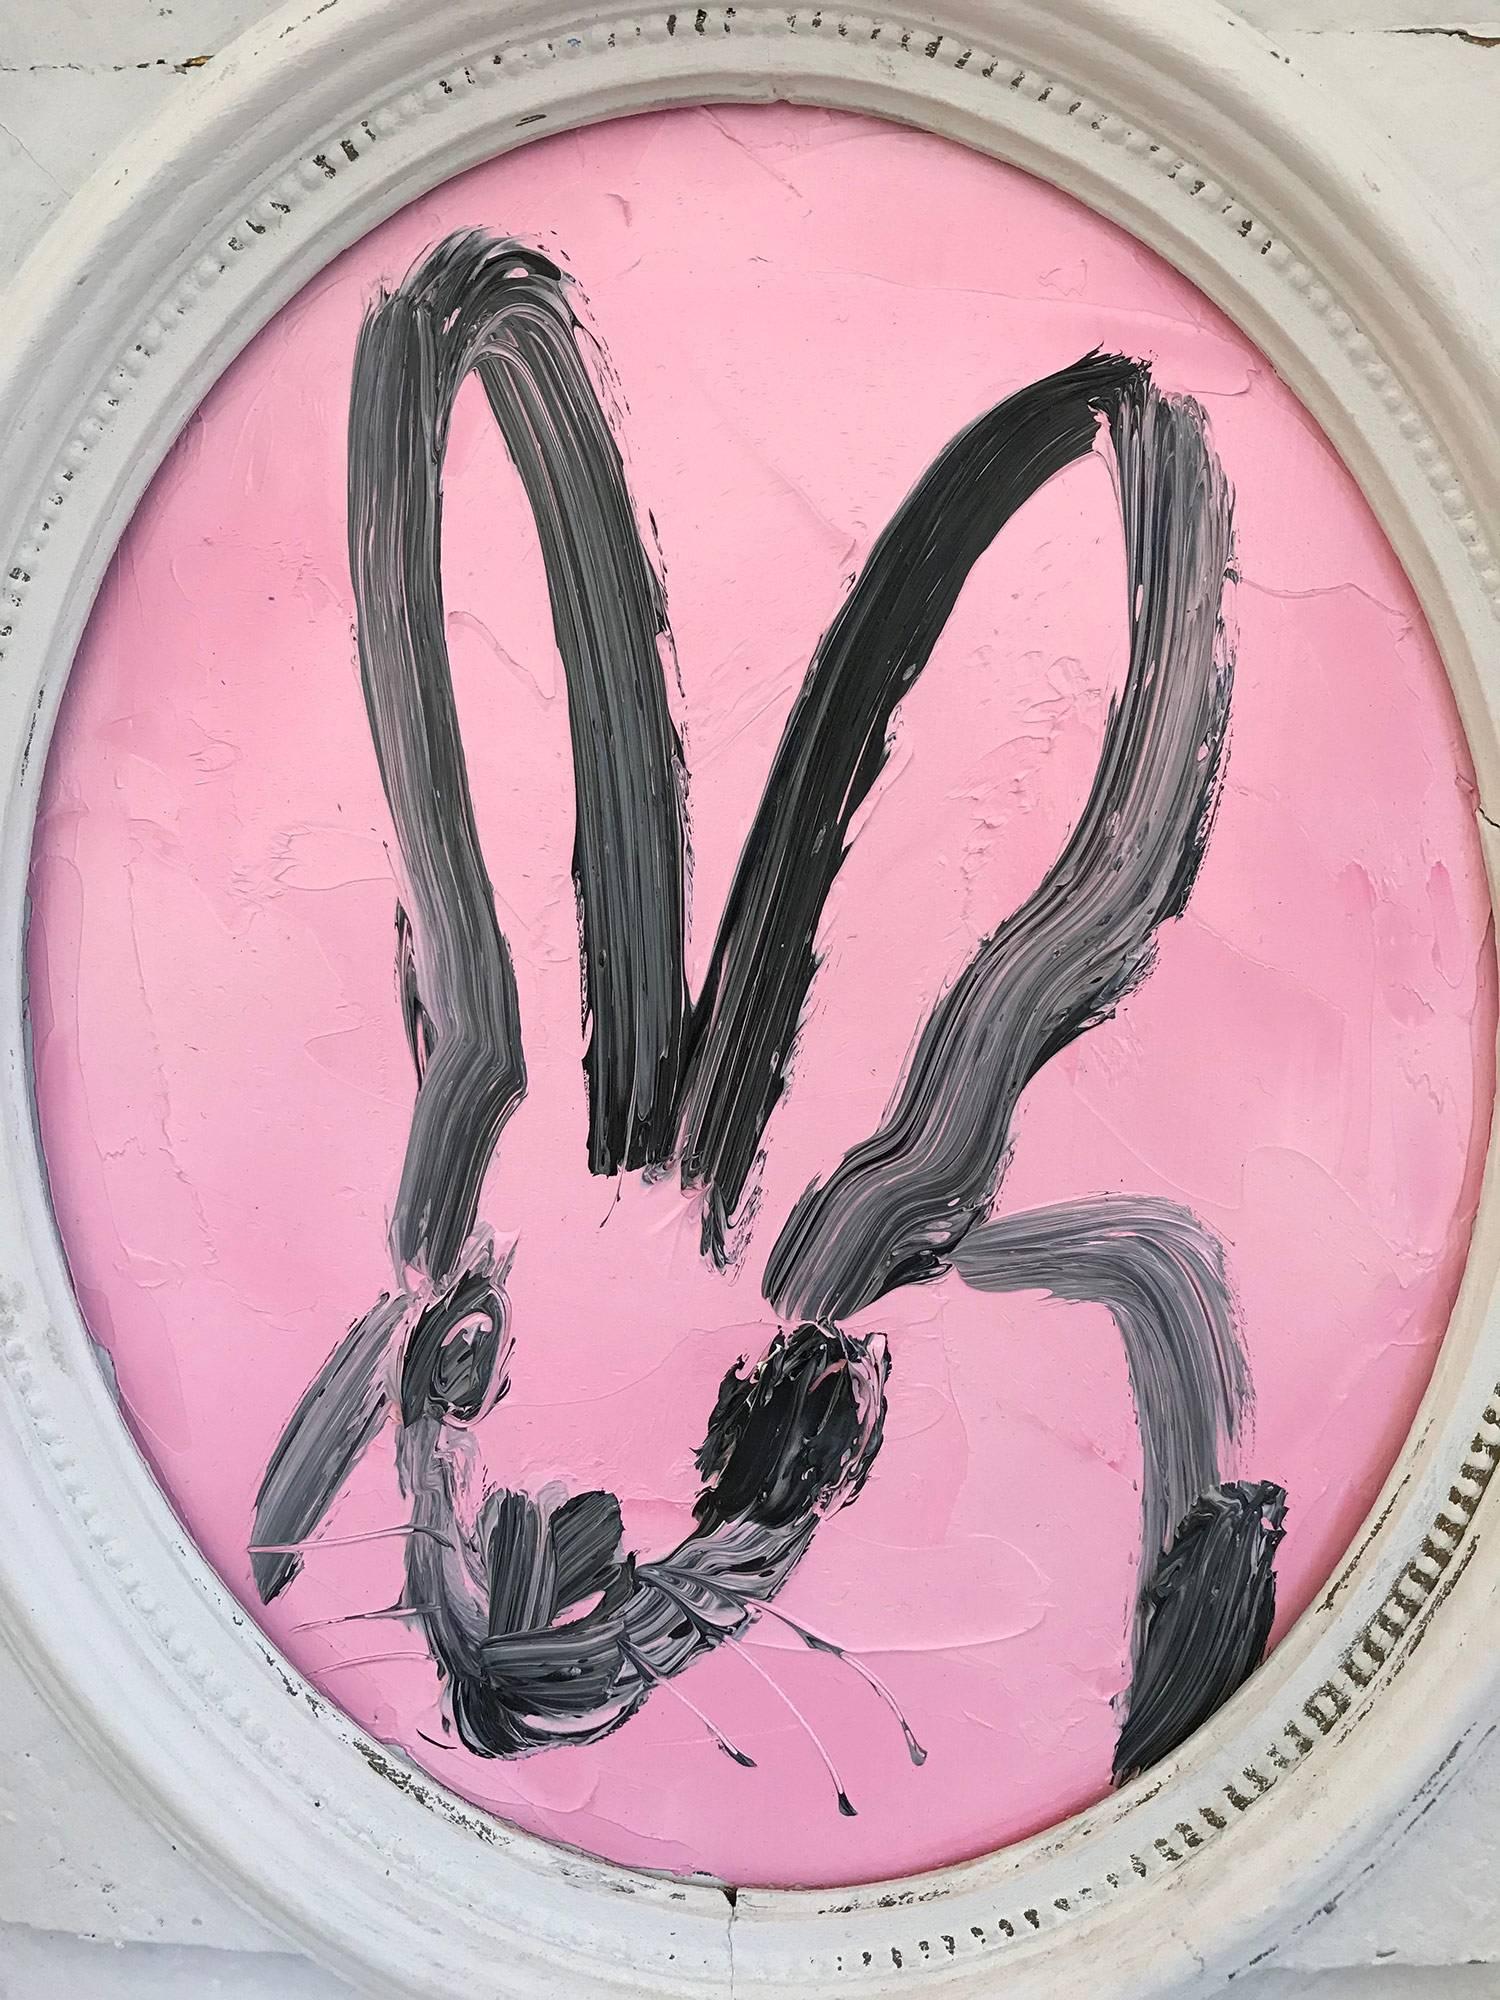 Untitled (Oval Bunny on Pink) - Painting by Hunt Slonem